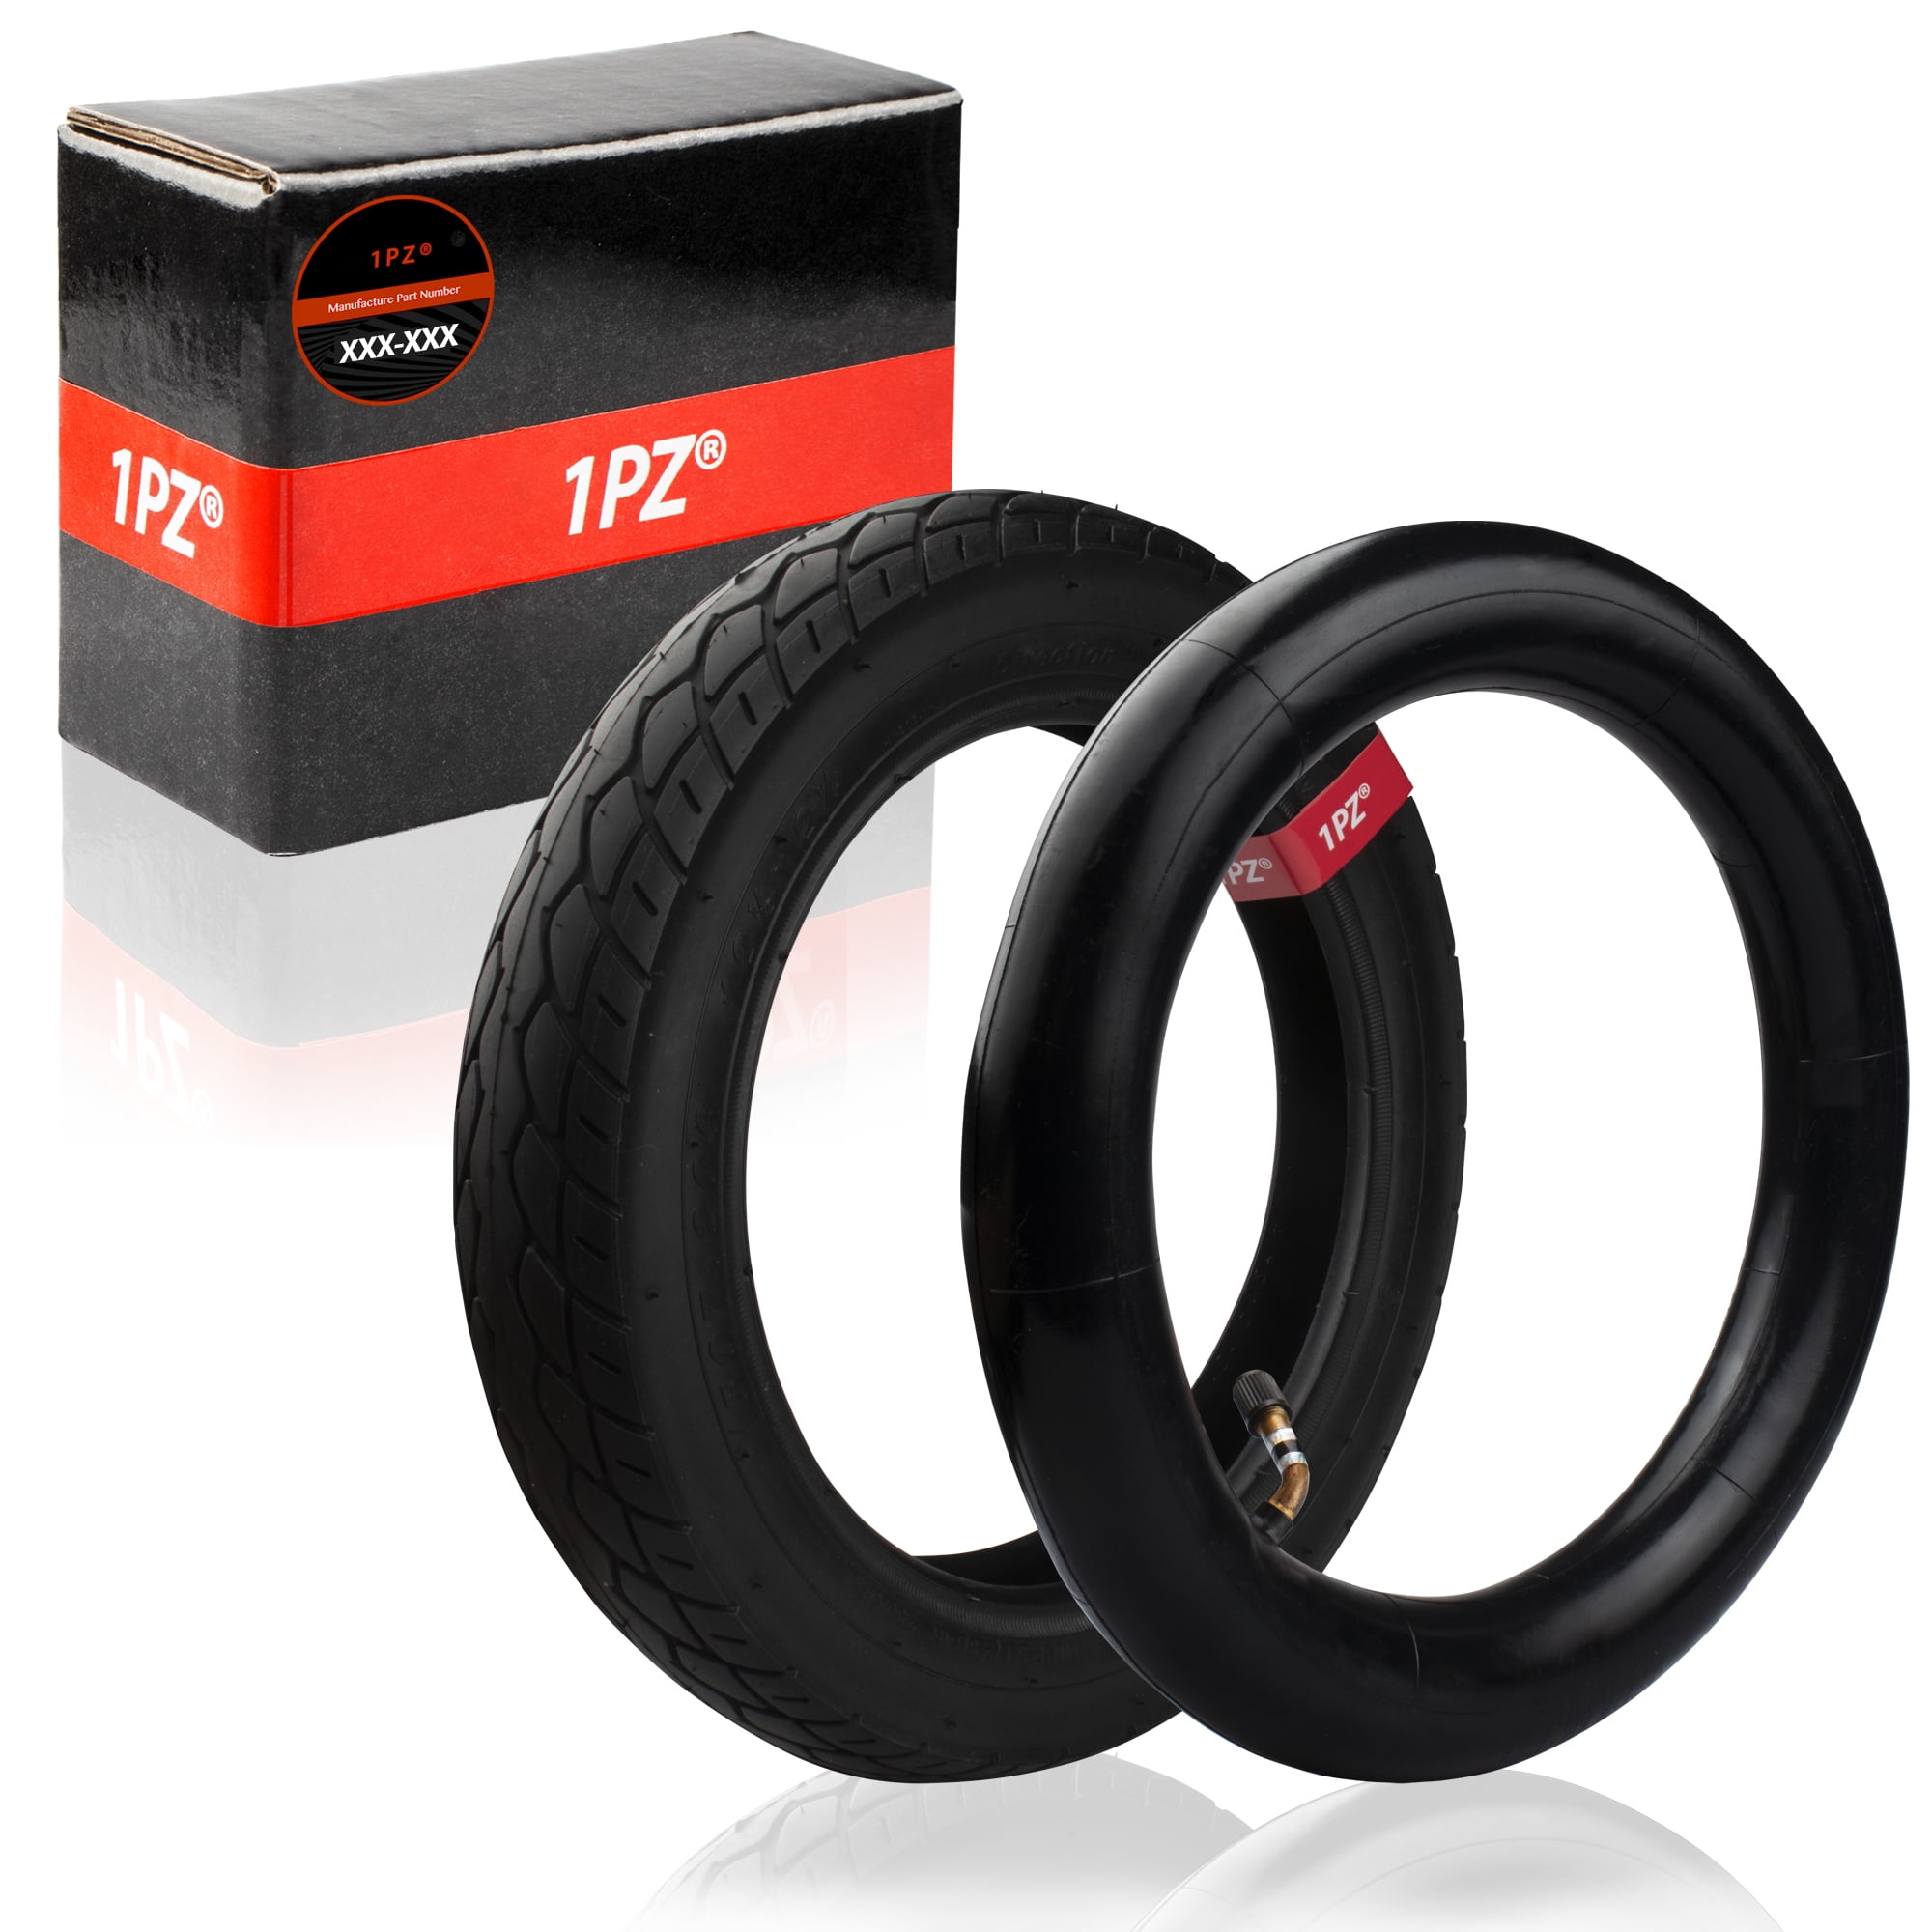 Clever Brand 3.00-4 Tire & Tube Combo